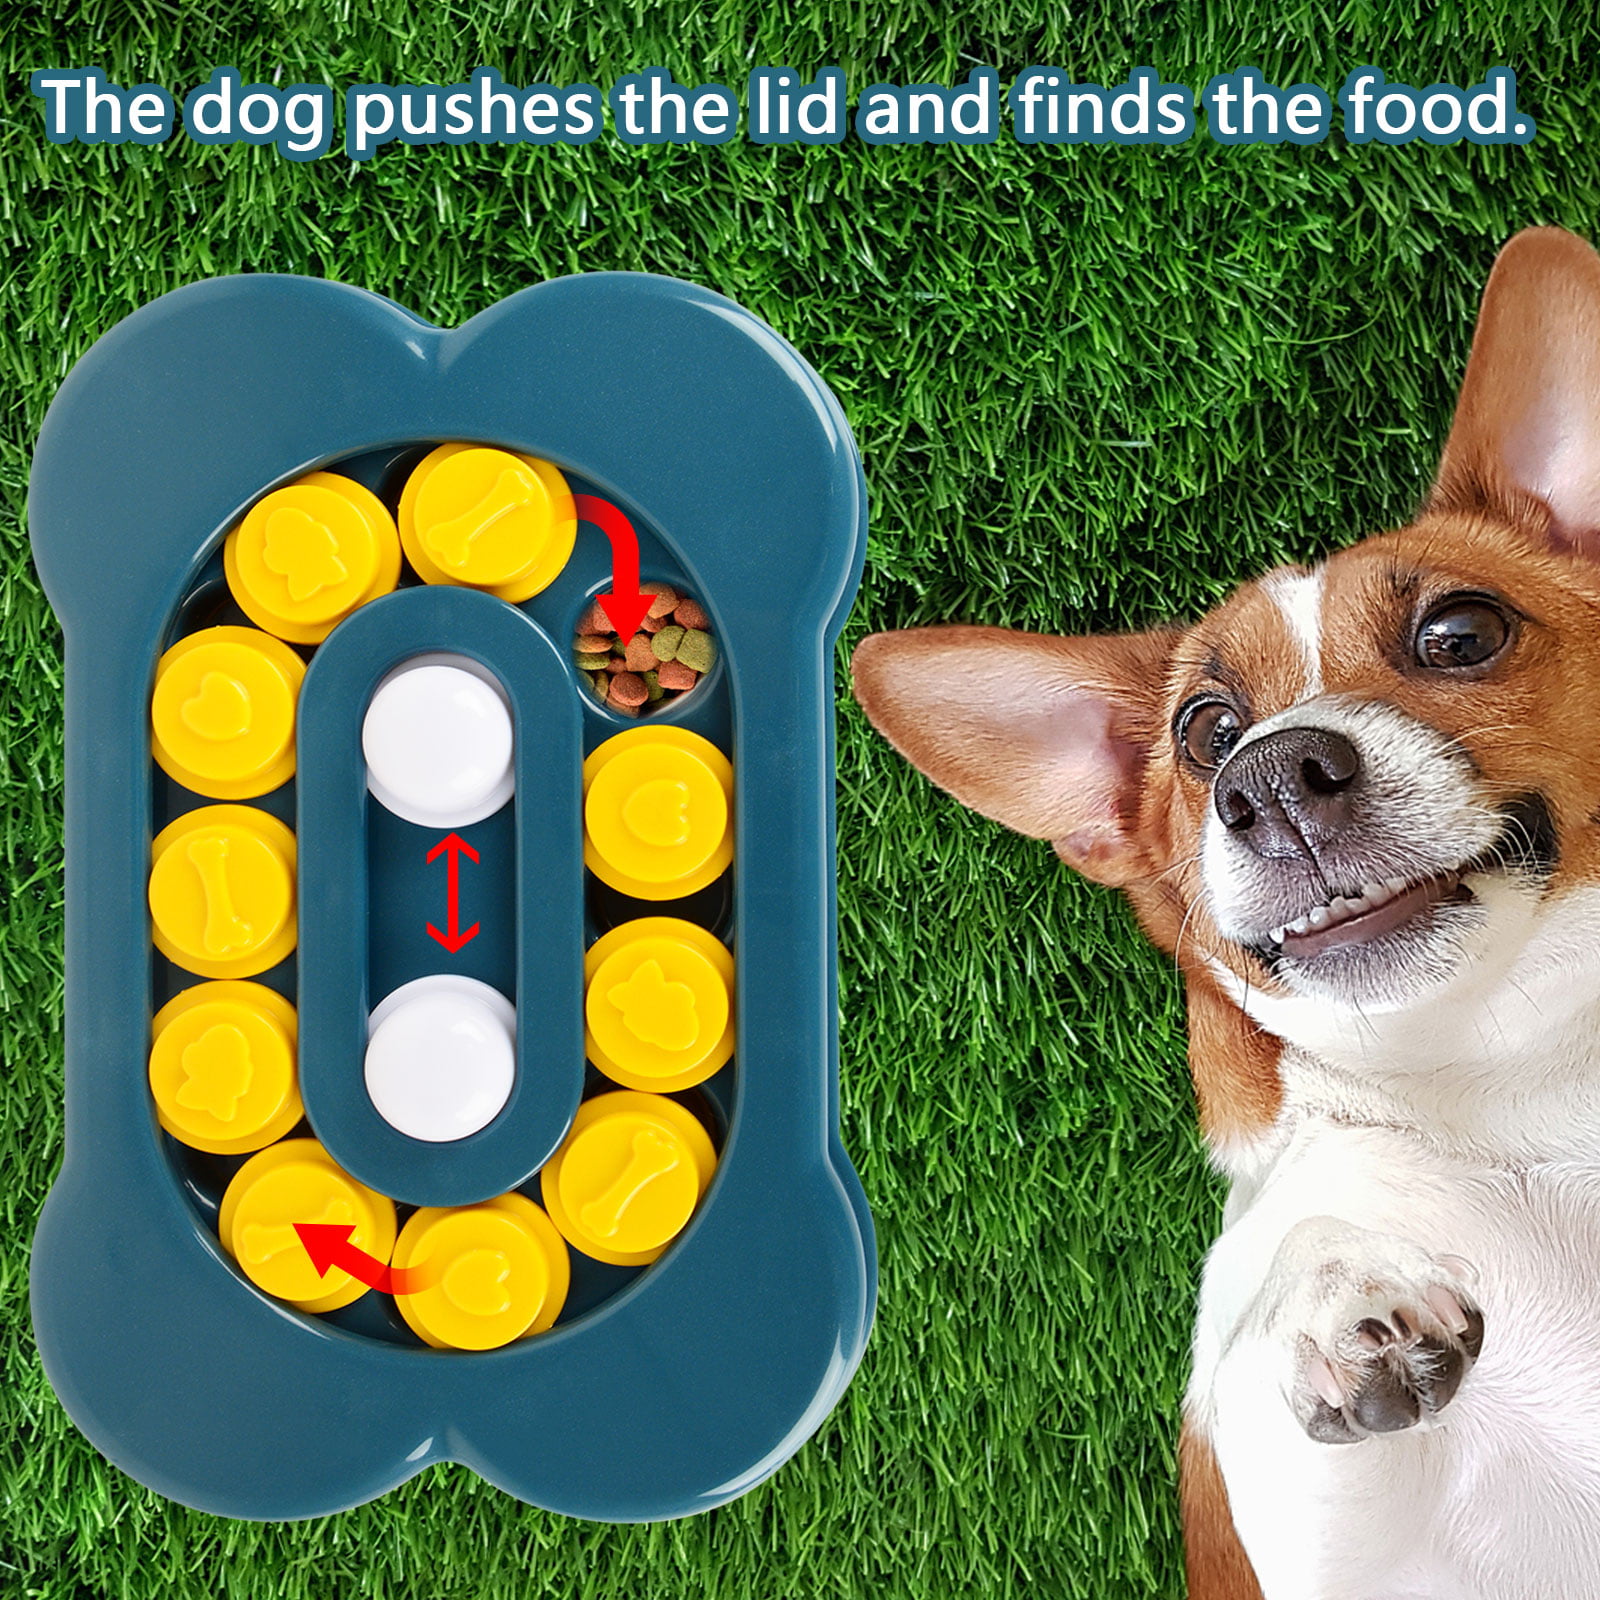 HIPPIH Interactive Dog Toys for Puppies 2 Pack, Dog Puzzle Toys